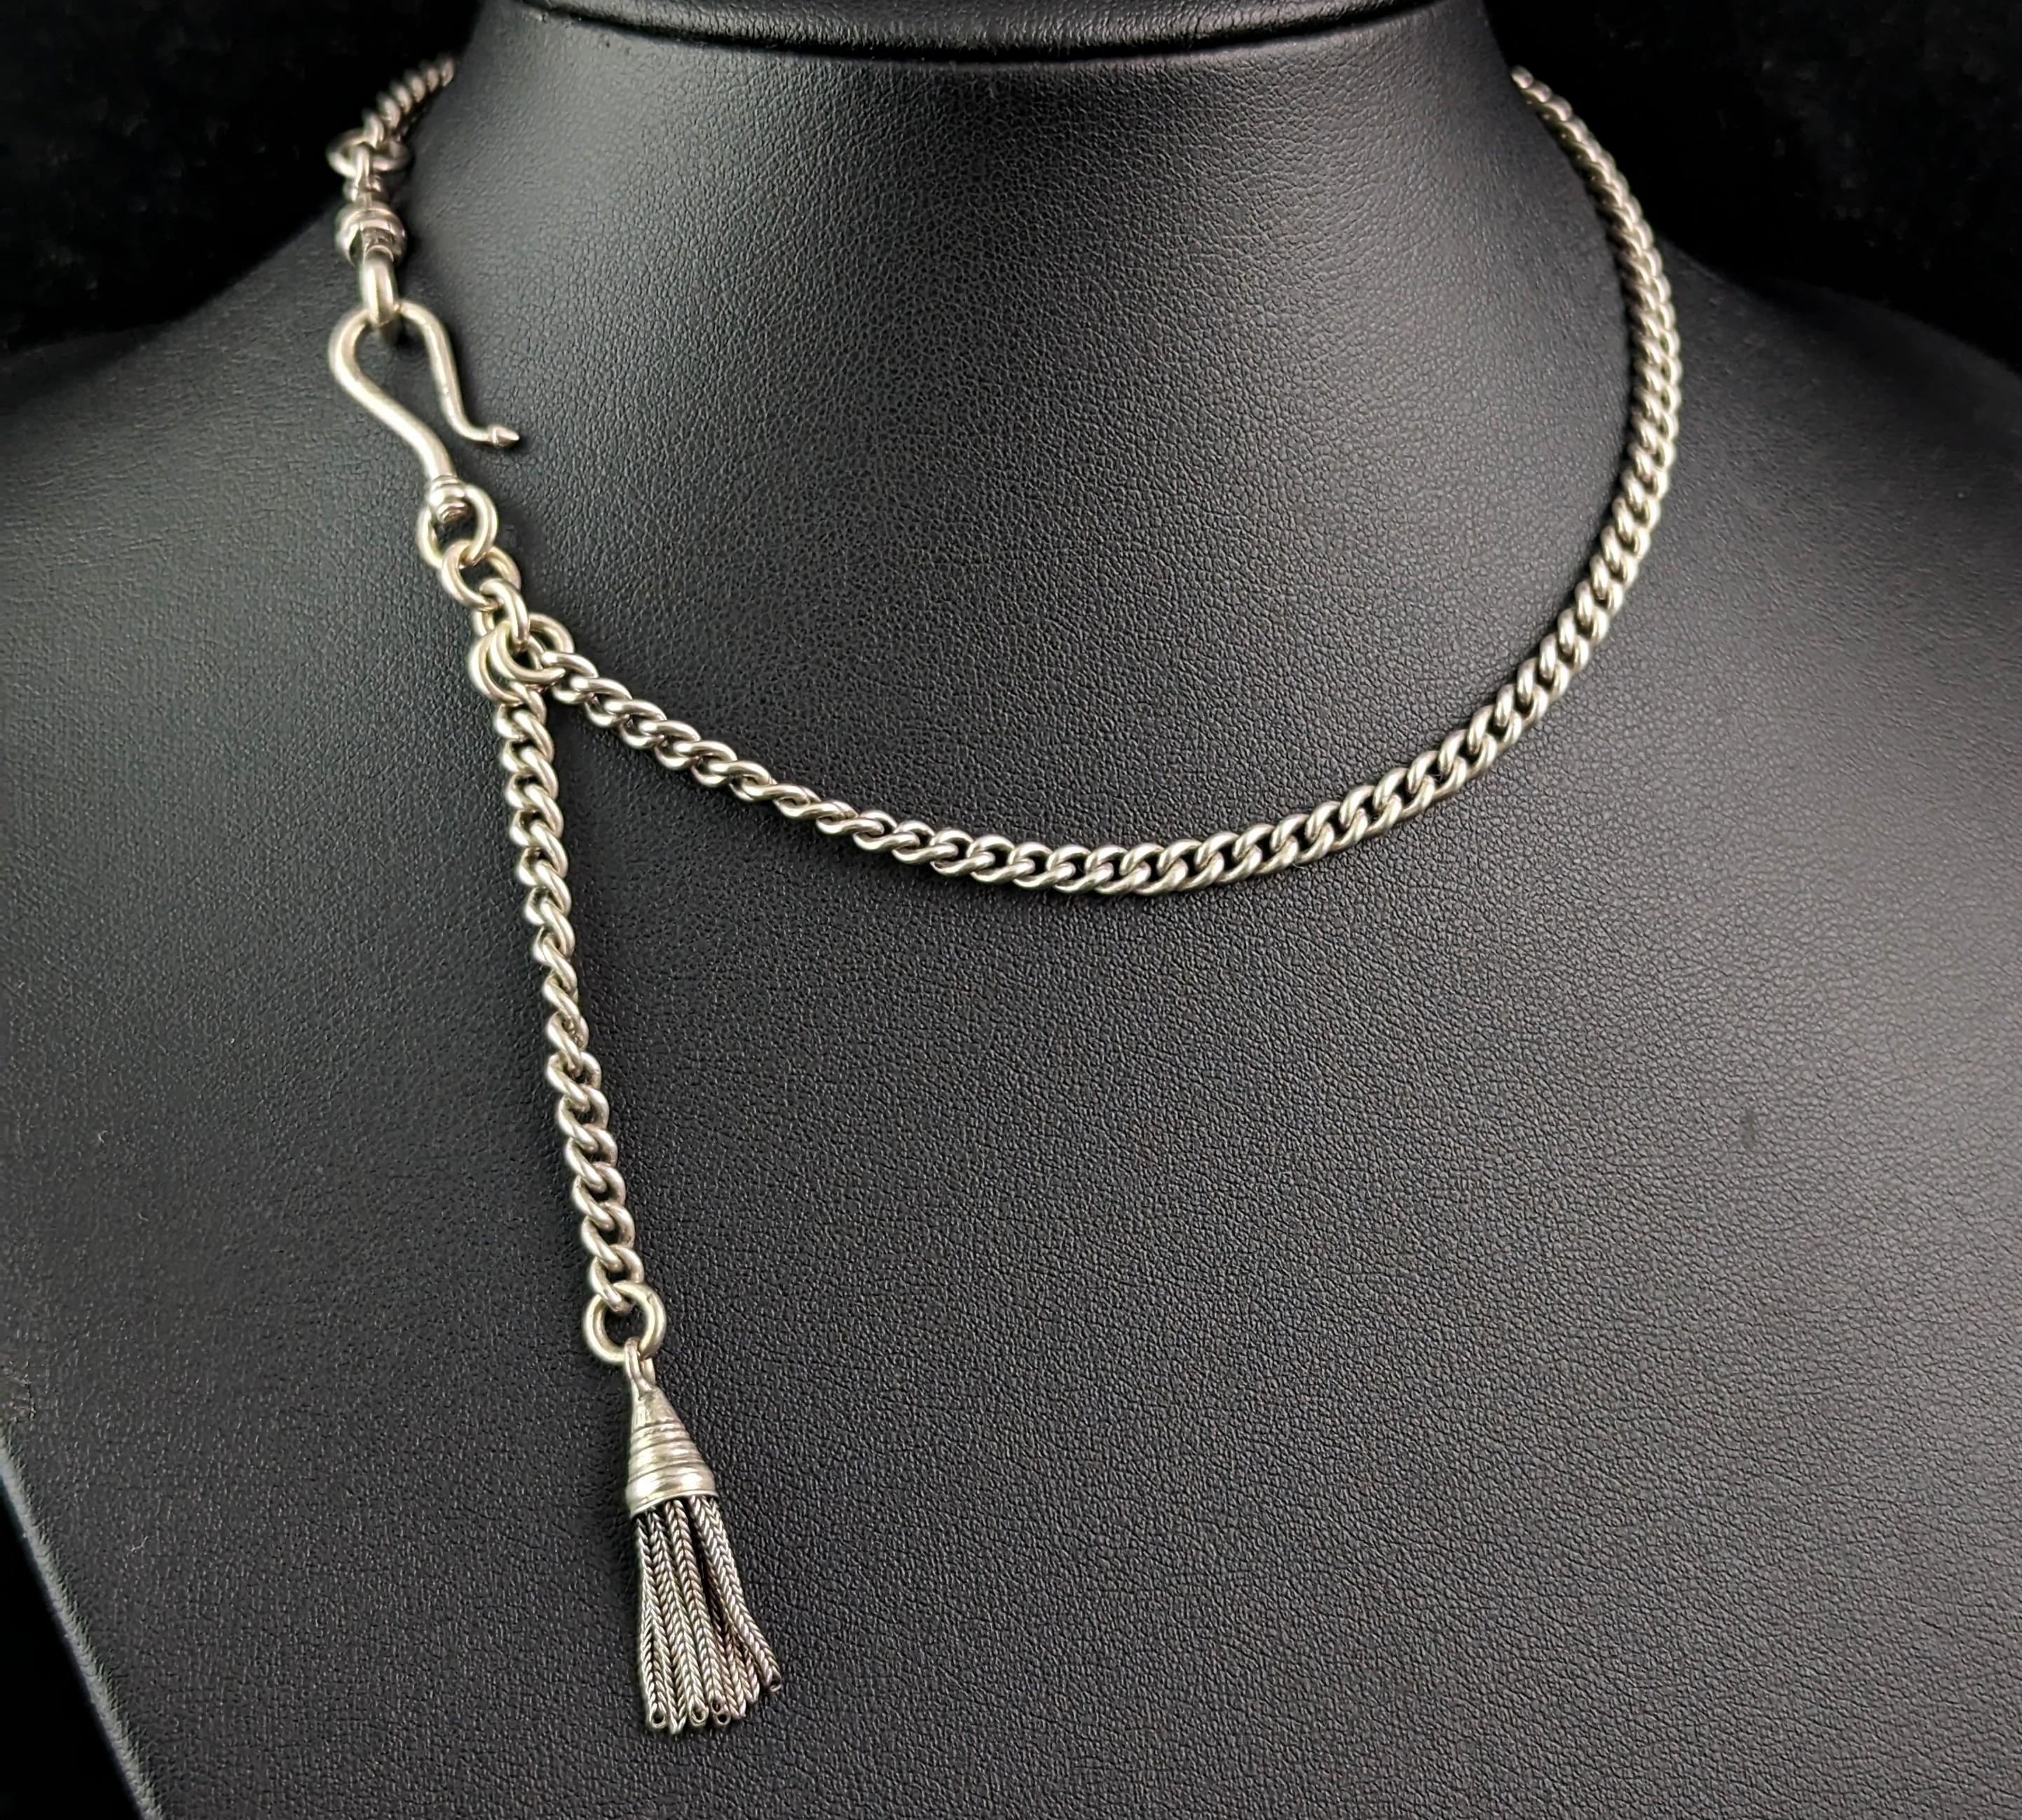 A most beautiful antique, Victorian era ladies chatelaine style Albertina or watch chain.

The chain is a slender, slightly graduated curb link much like an Albert chain and it has a small silver chatelaine hook and a dog clip fastener, it has a